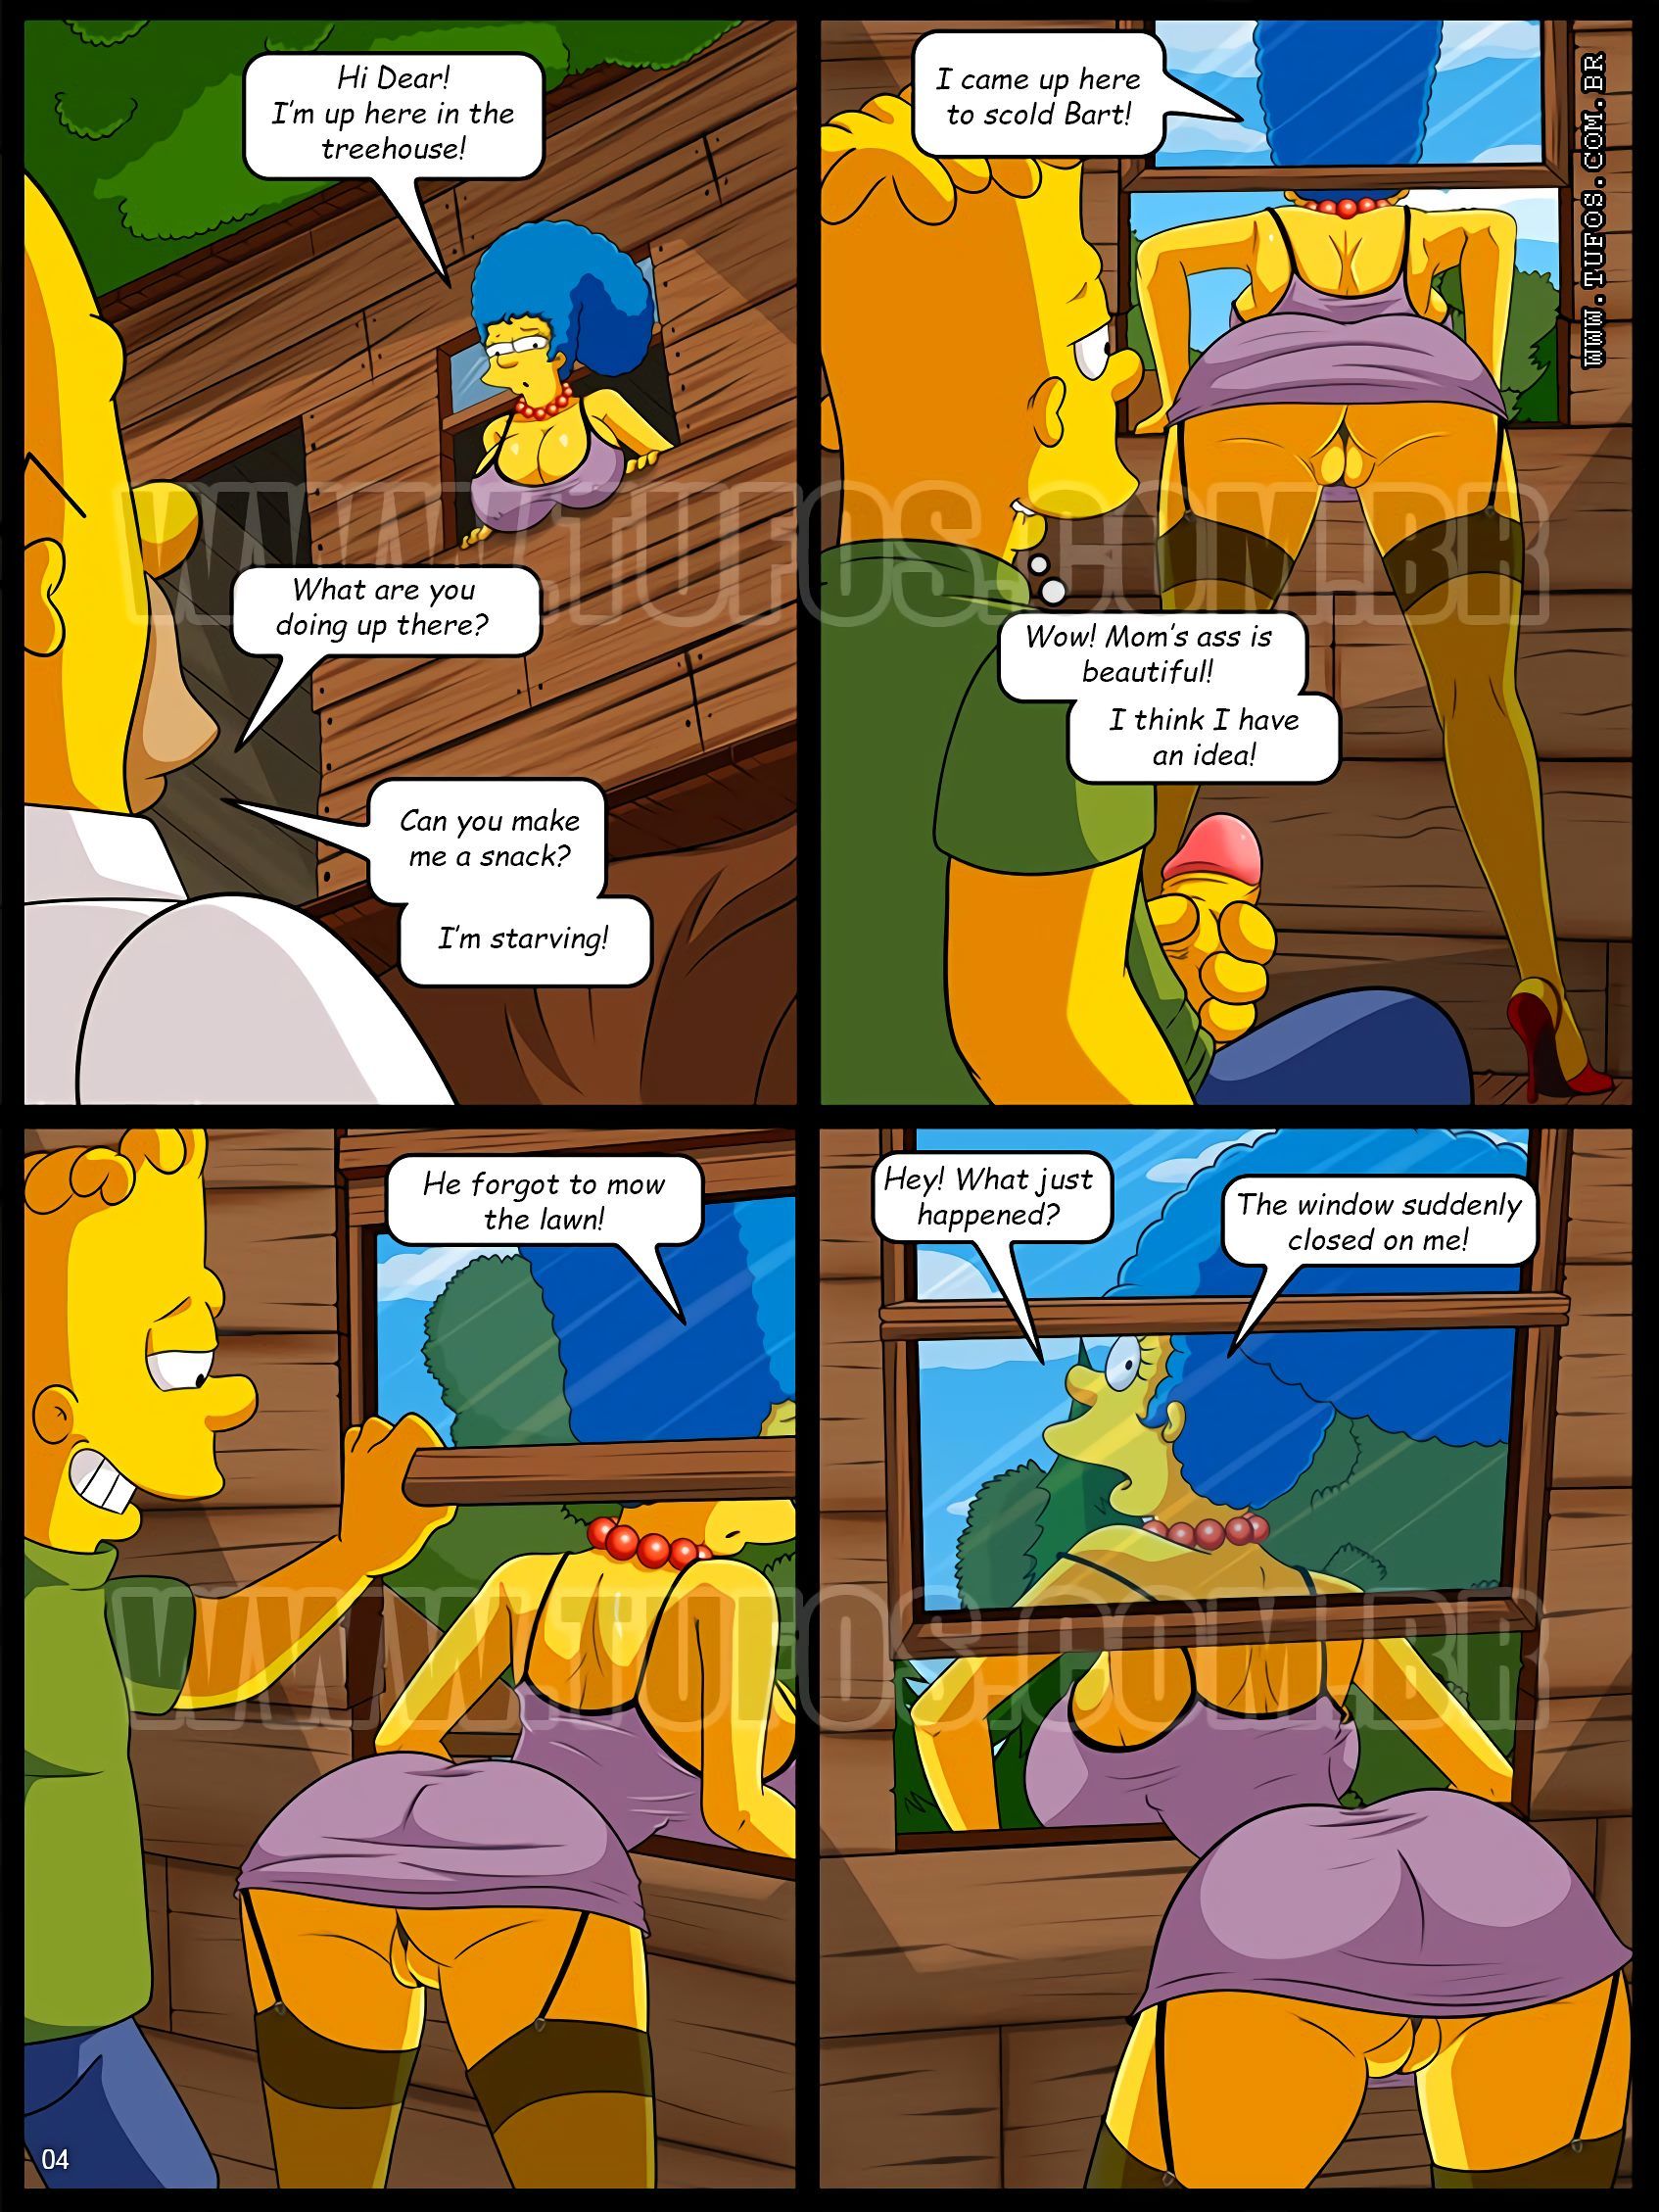 Os simpsons - Fucking in the Treehouse (Tufos) page 4